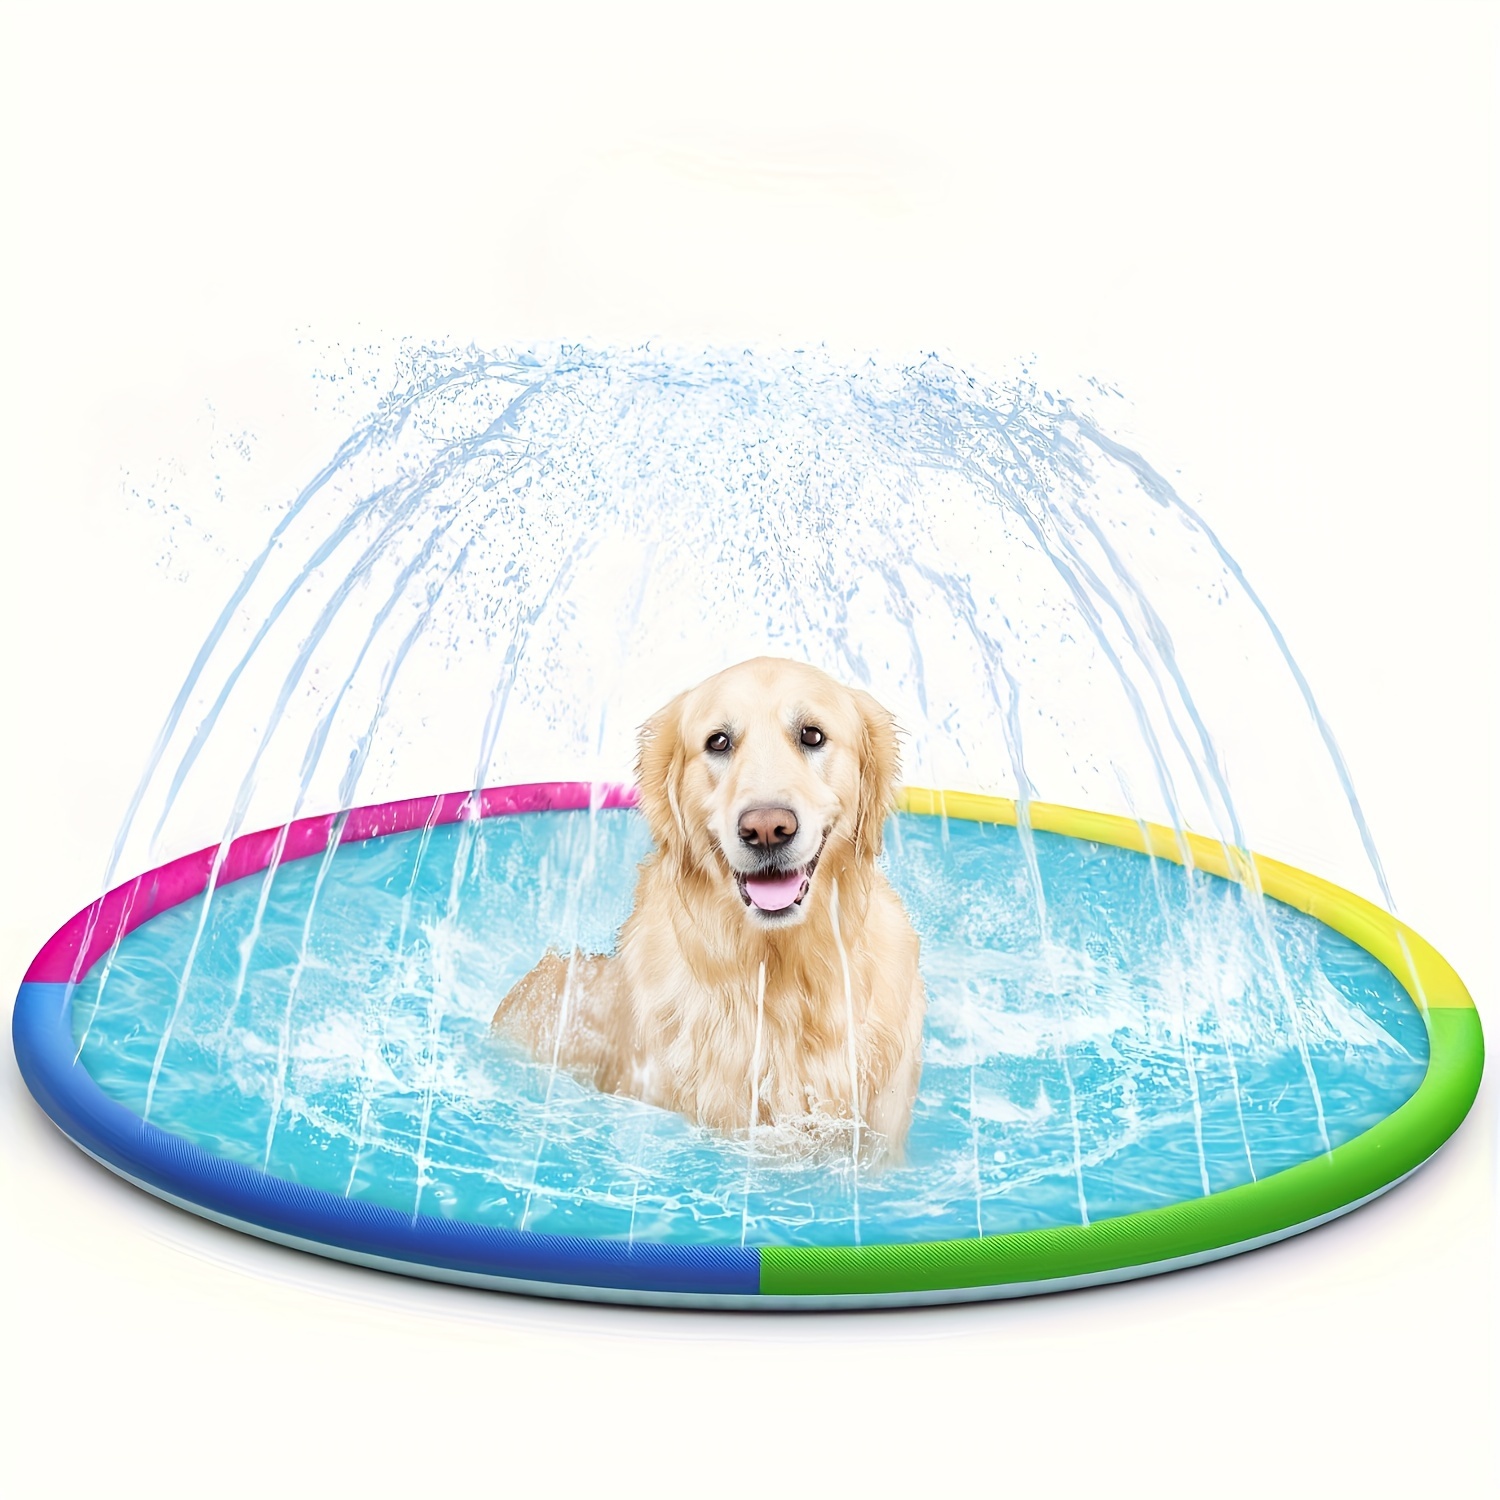 

67" Splash Guard & Sprinkler Play Mat - Inflatable Summer Outdoor Water Pad For Parties, Dogs & Fun In The Sun